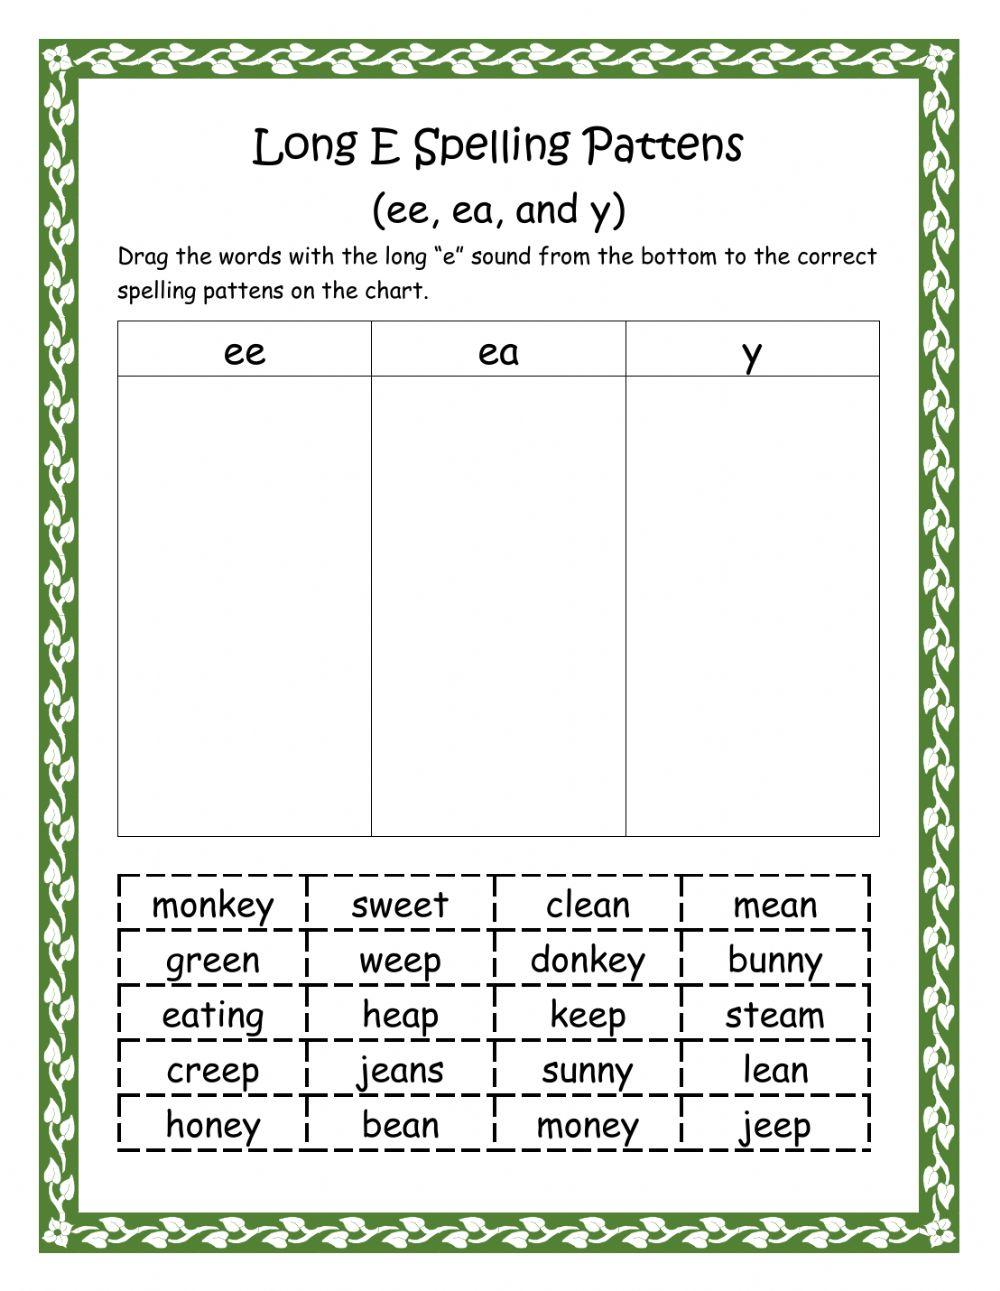 Spelling Patterns Long E (ee, ea, and y)